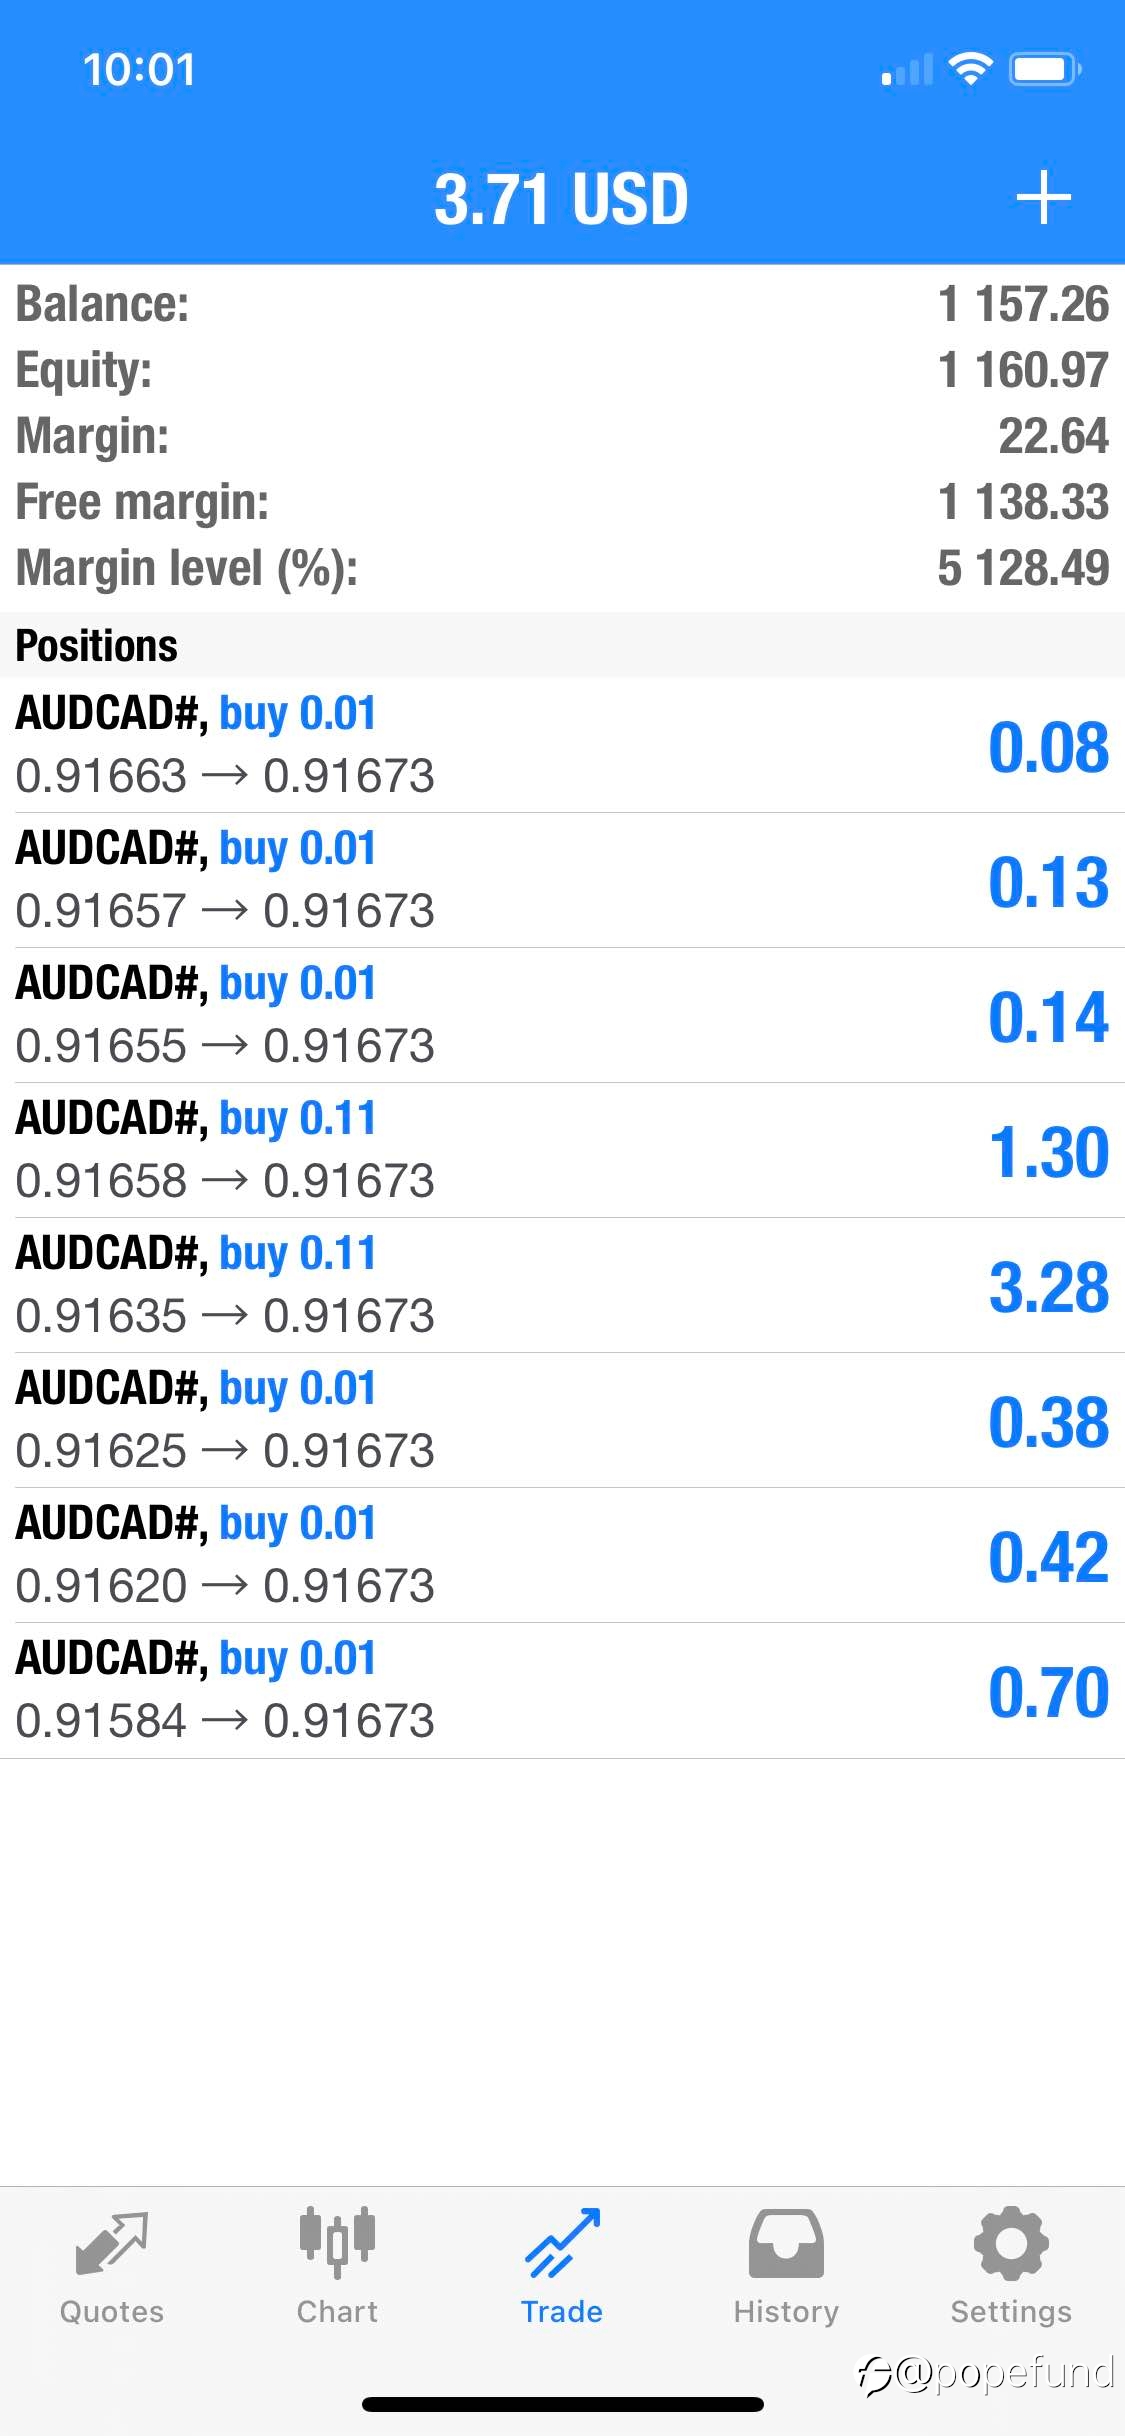 AUDCAD longs just squeezed due to its short term expectations.